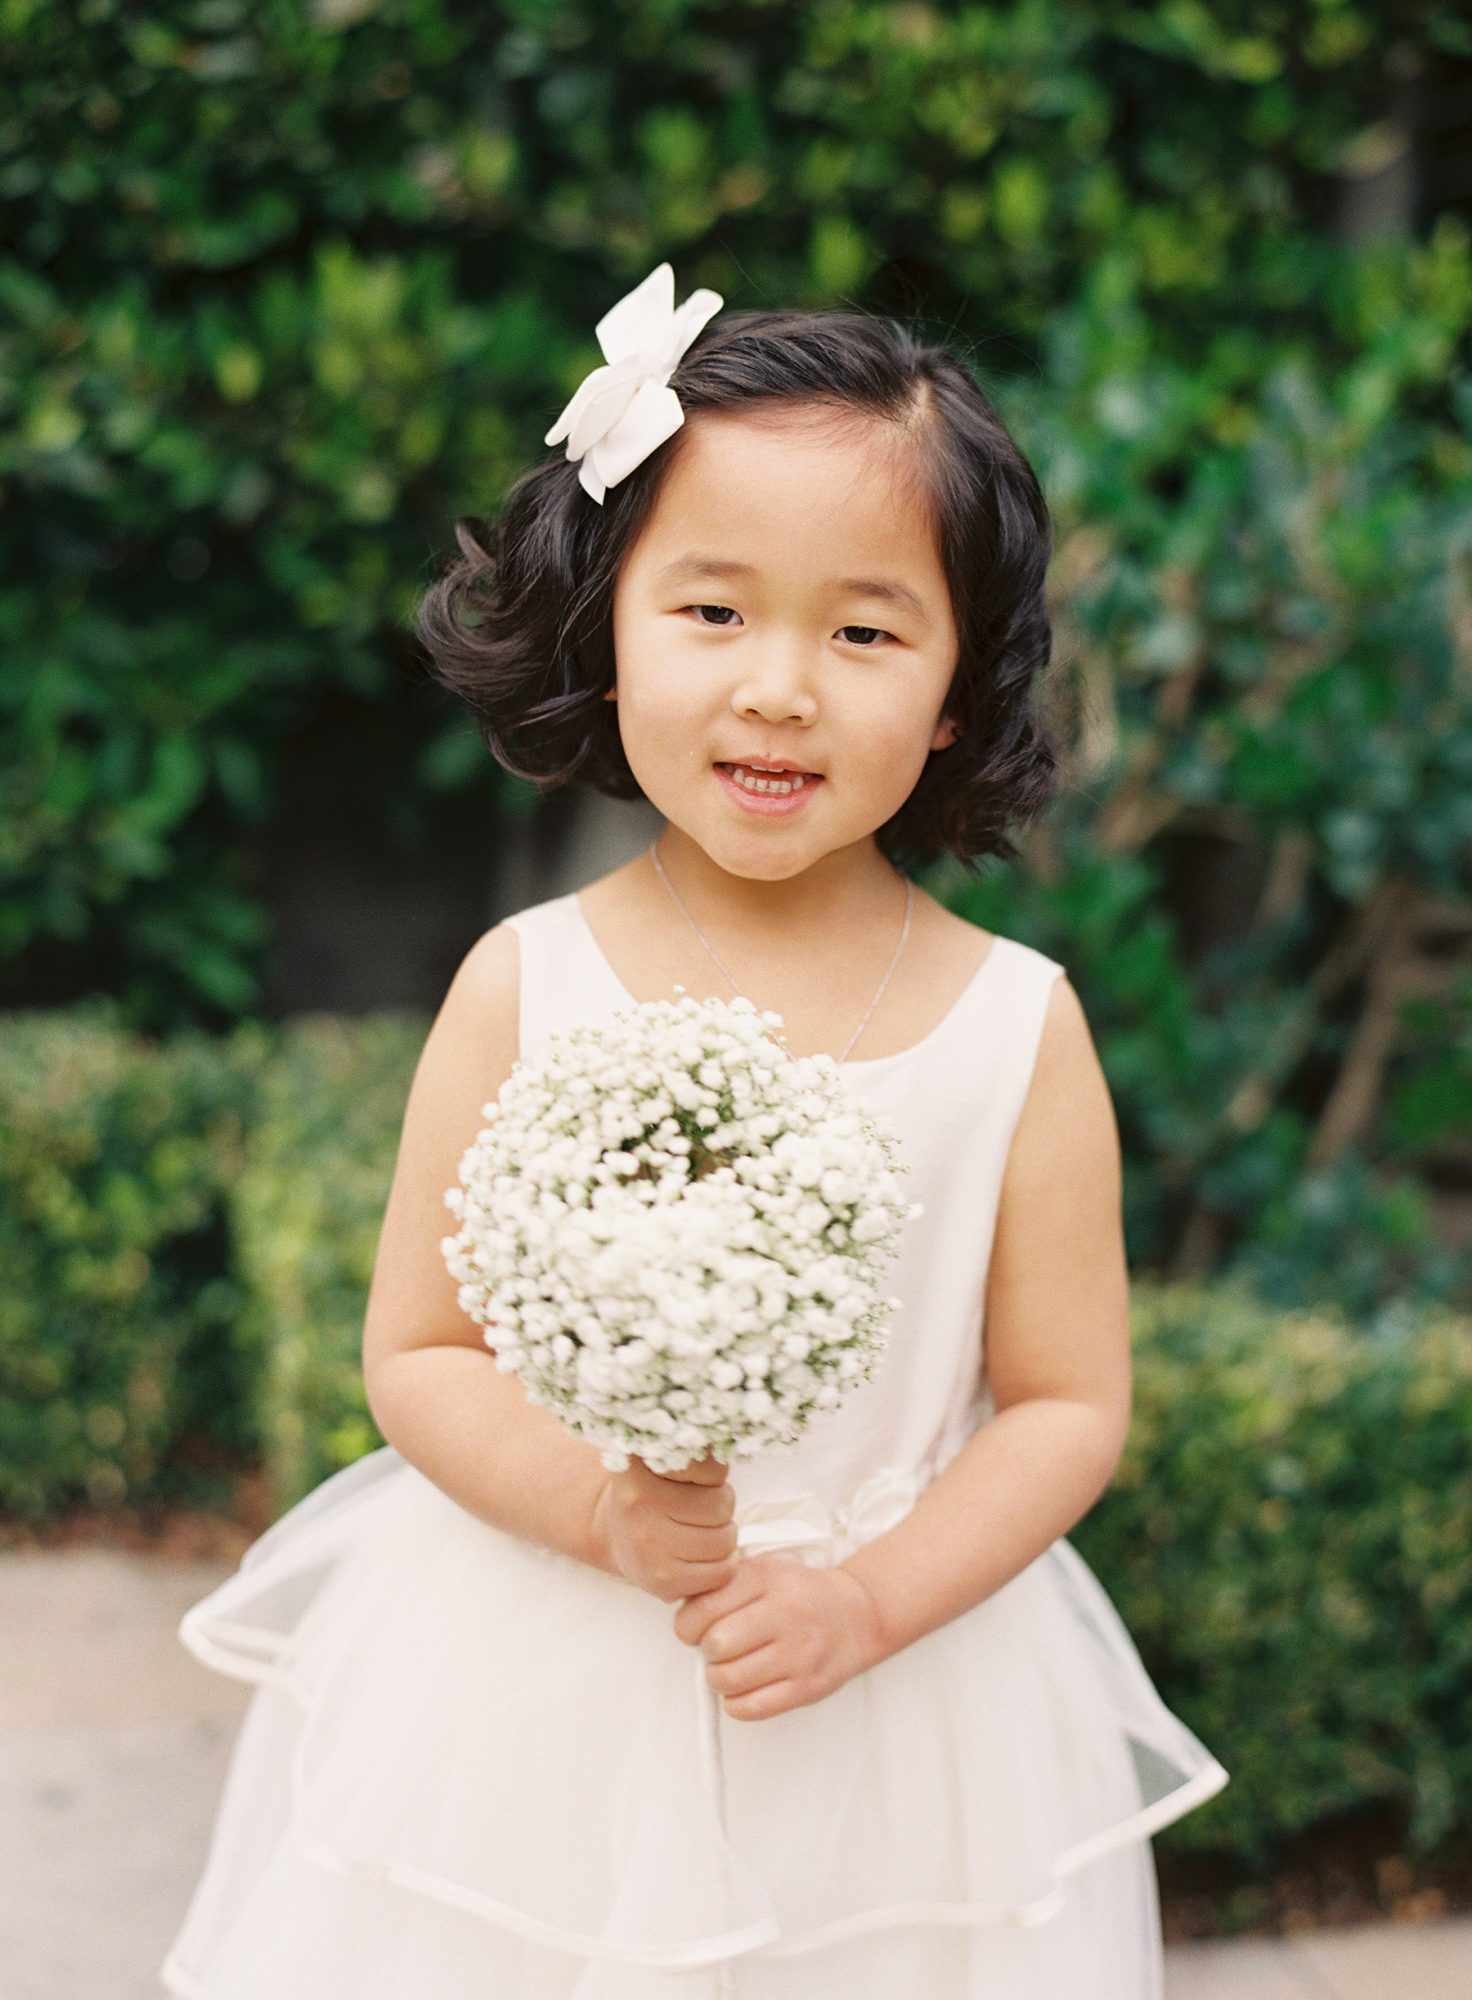 Adorable Hairstyle Ideas for Your Flower Girls | Martha Stewart